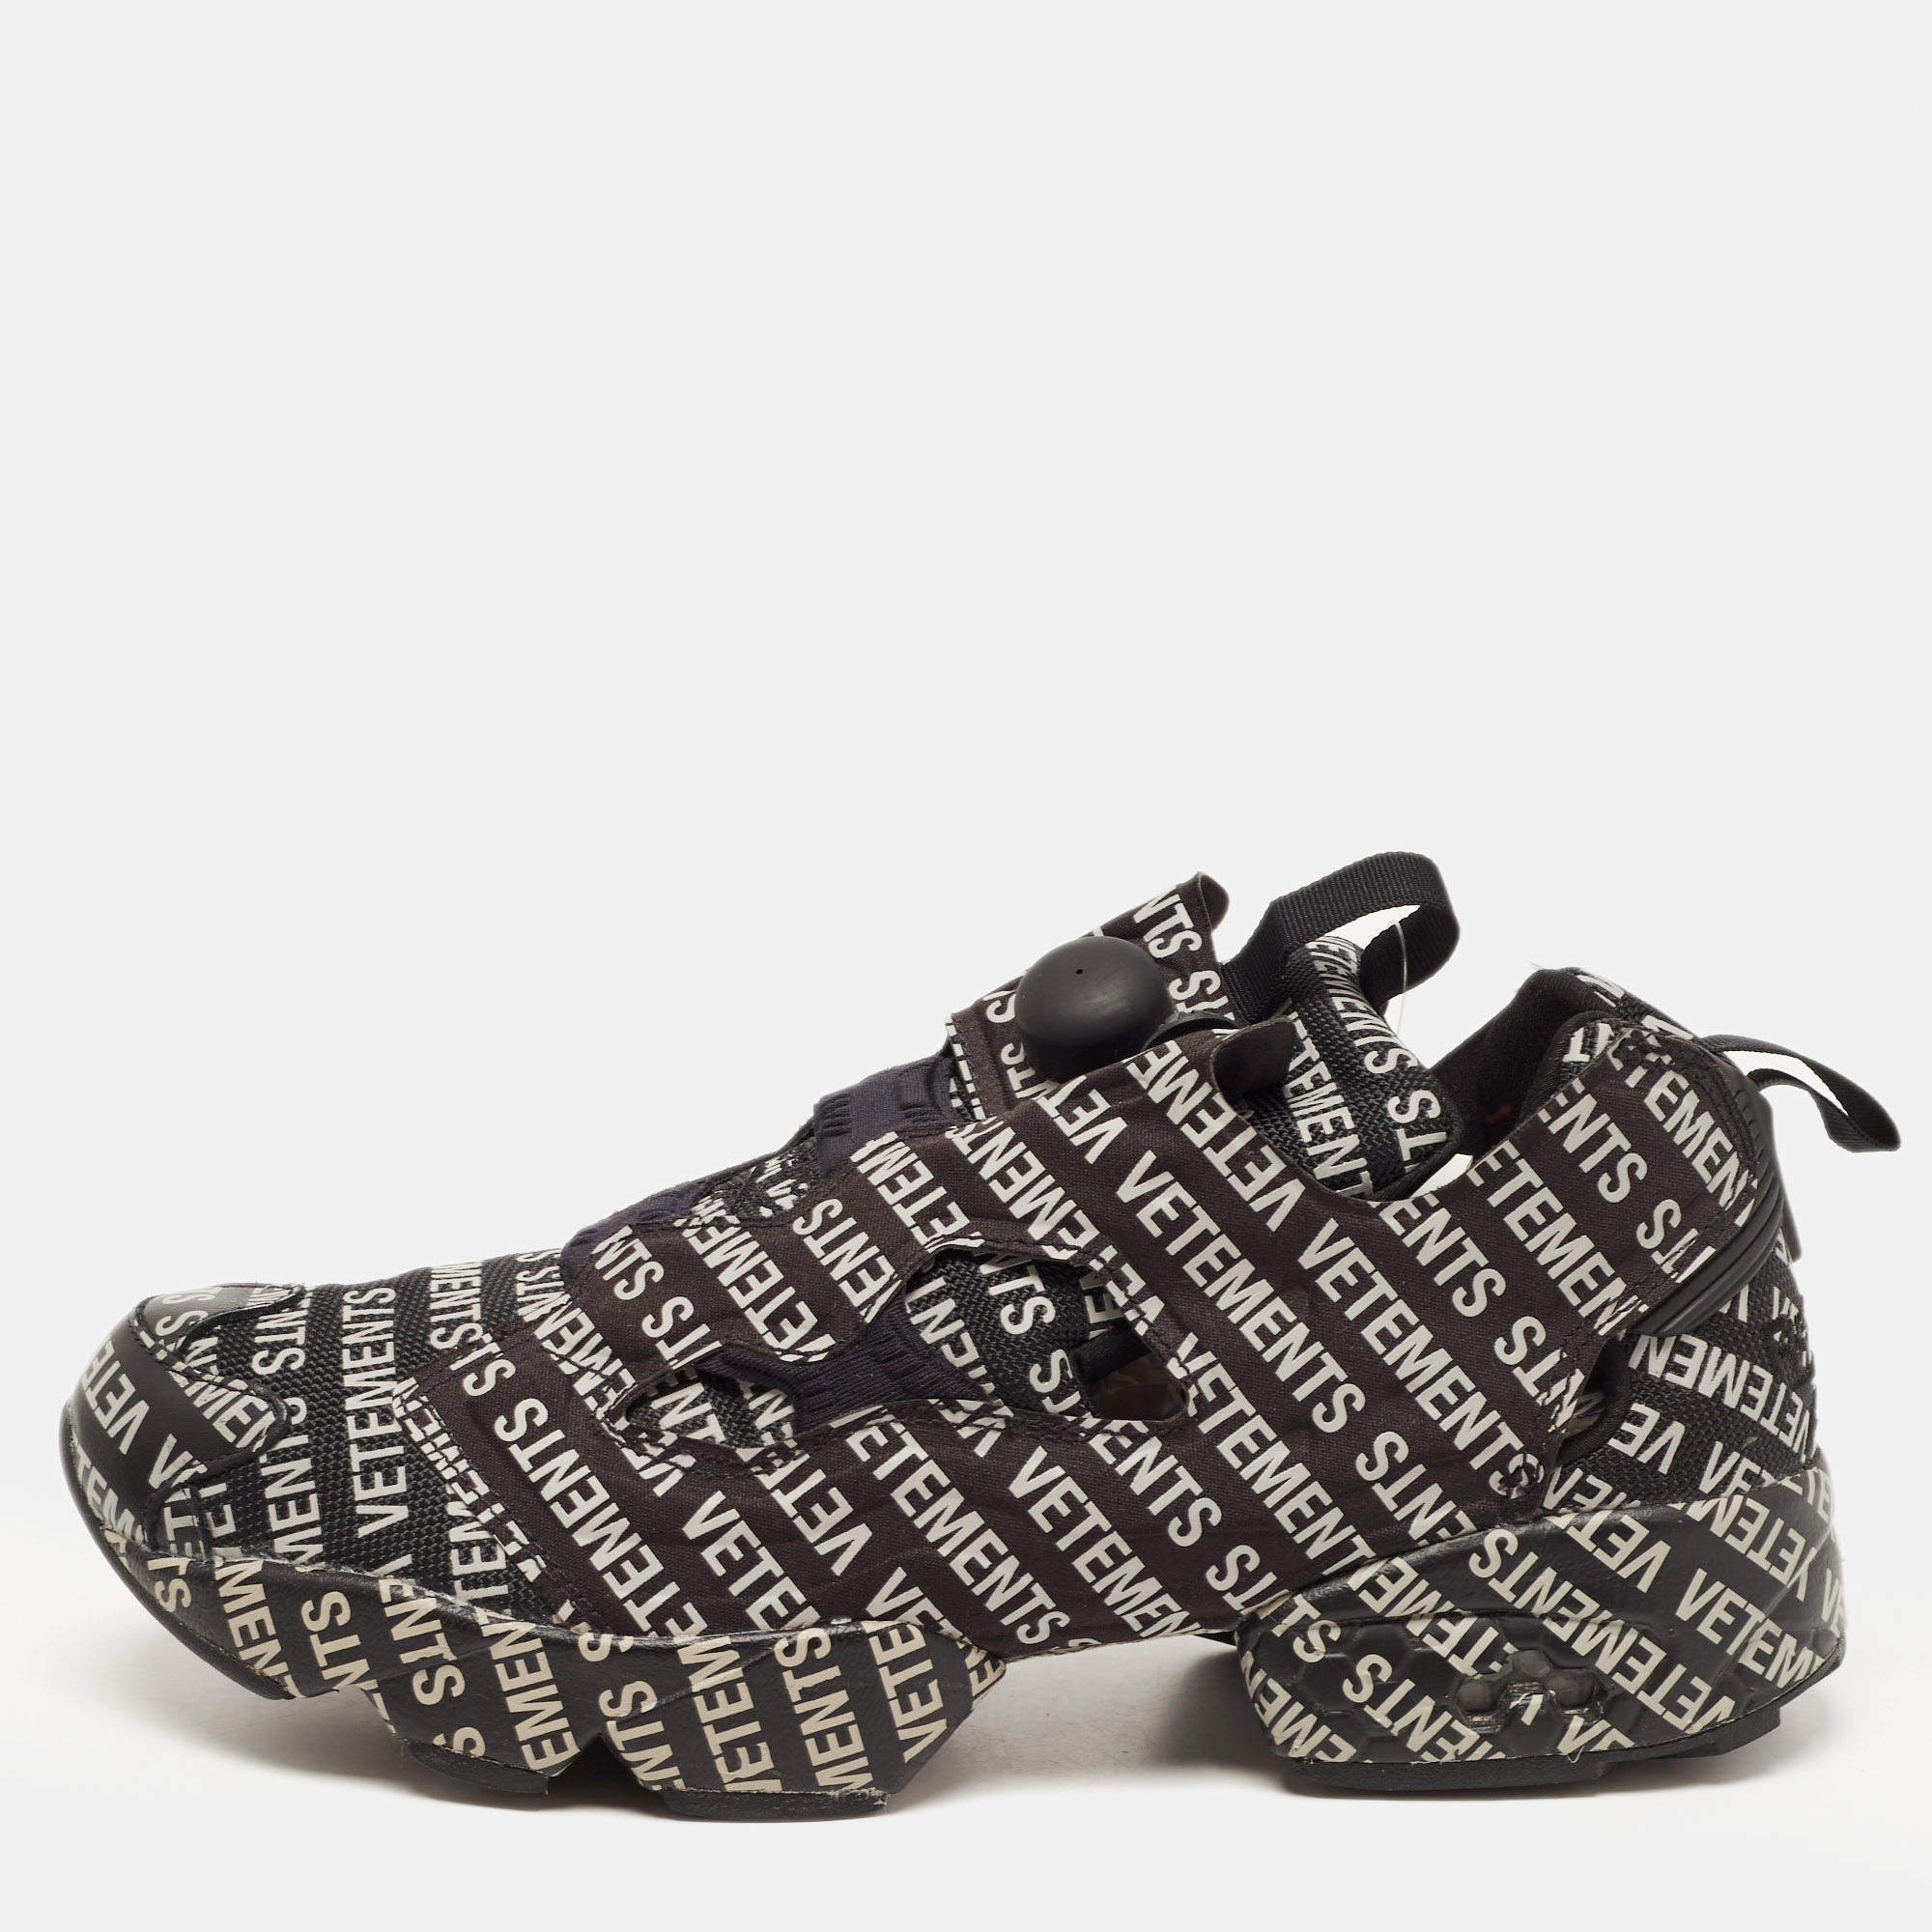 Vetements x Black/White Monogram Canvas and Leather Instapump Fury Sneakers Size 42.5 Vetements |